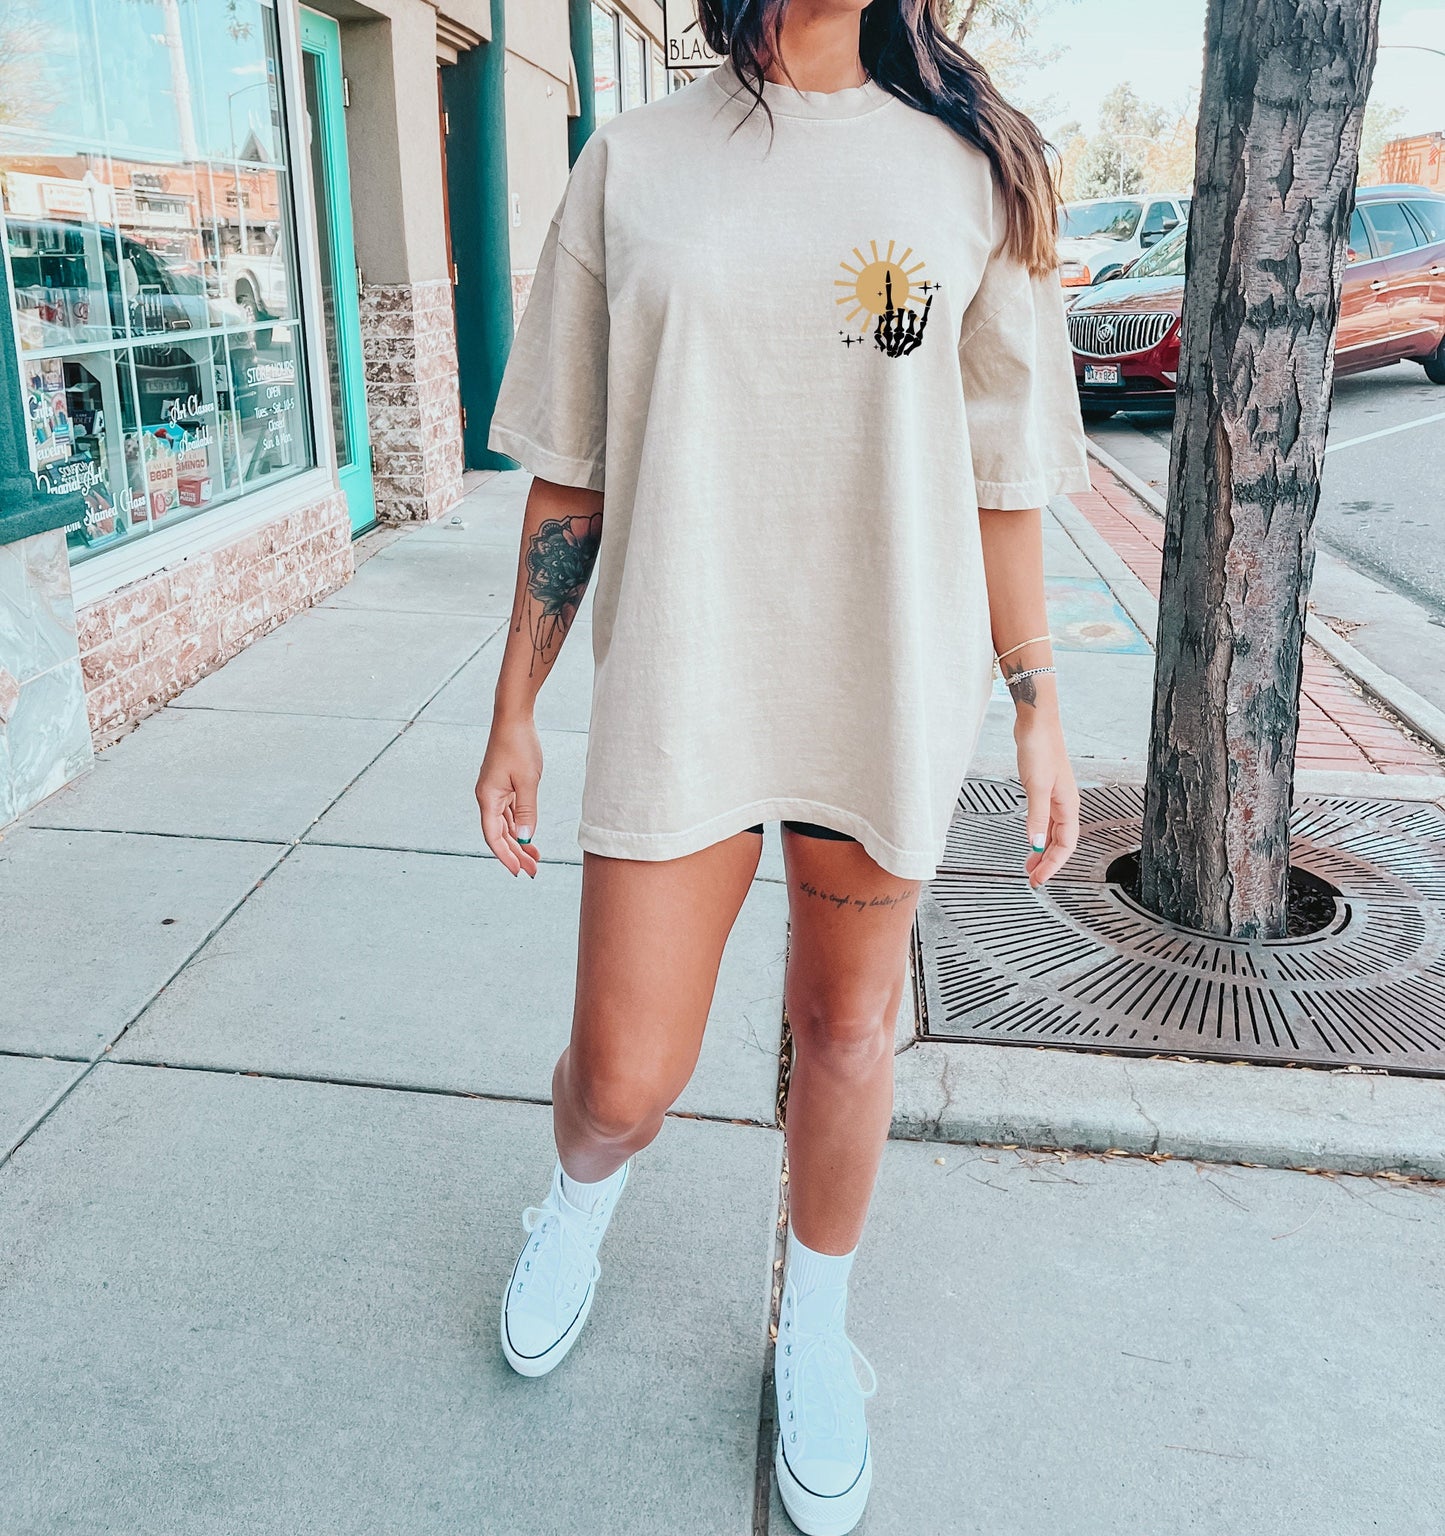 Tanned Tatted Tipsy T-Shirt, Oversized T-Shirt, Beach Shirt, Beach Cover Up, Vacation T-Shirt, Tanned and Tipsy, Cruise T-Shirt